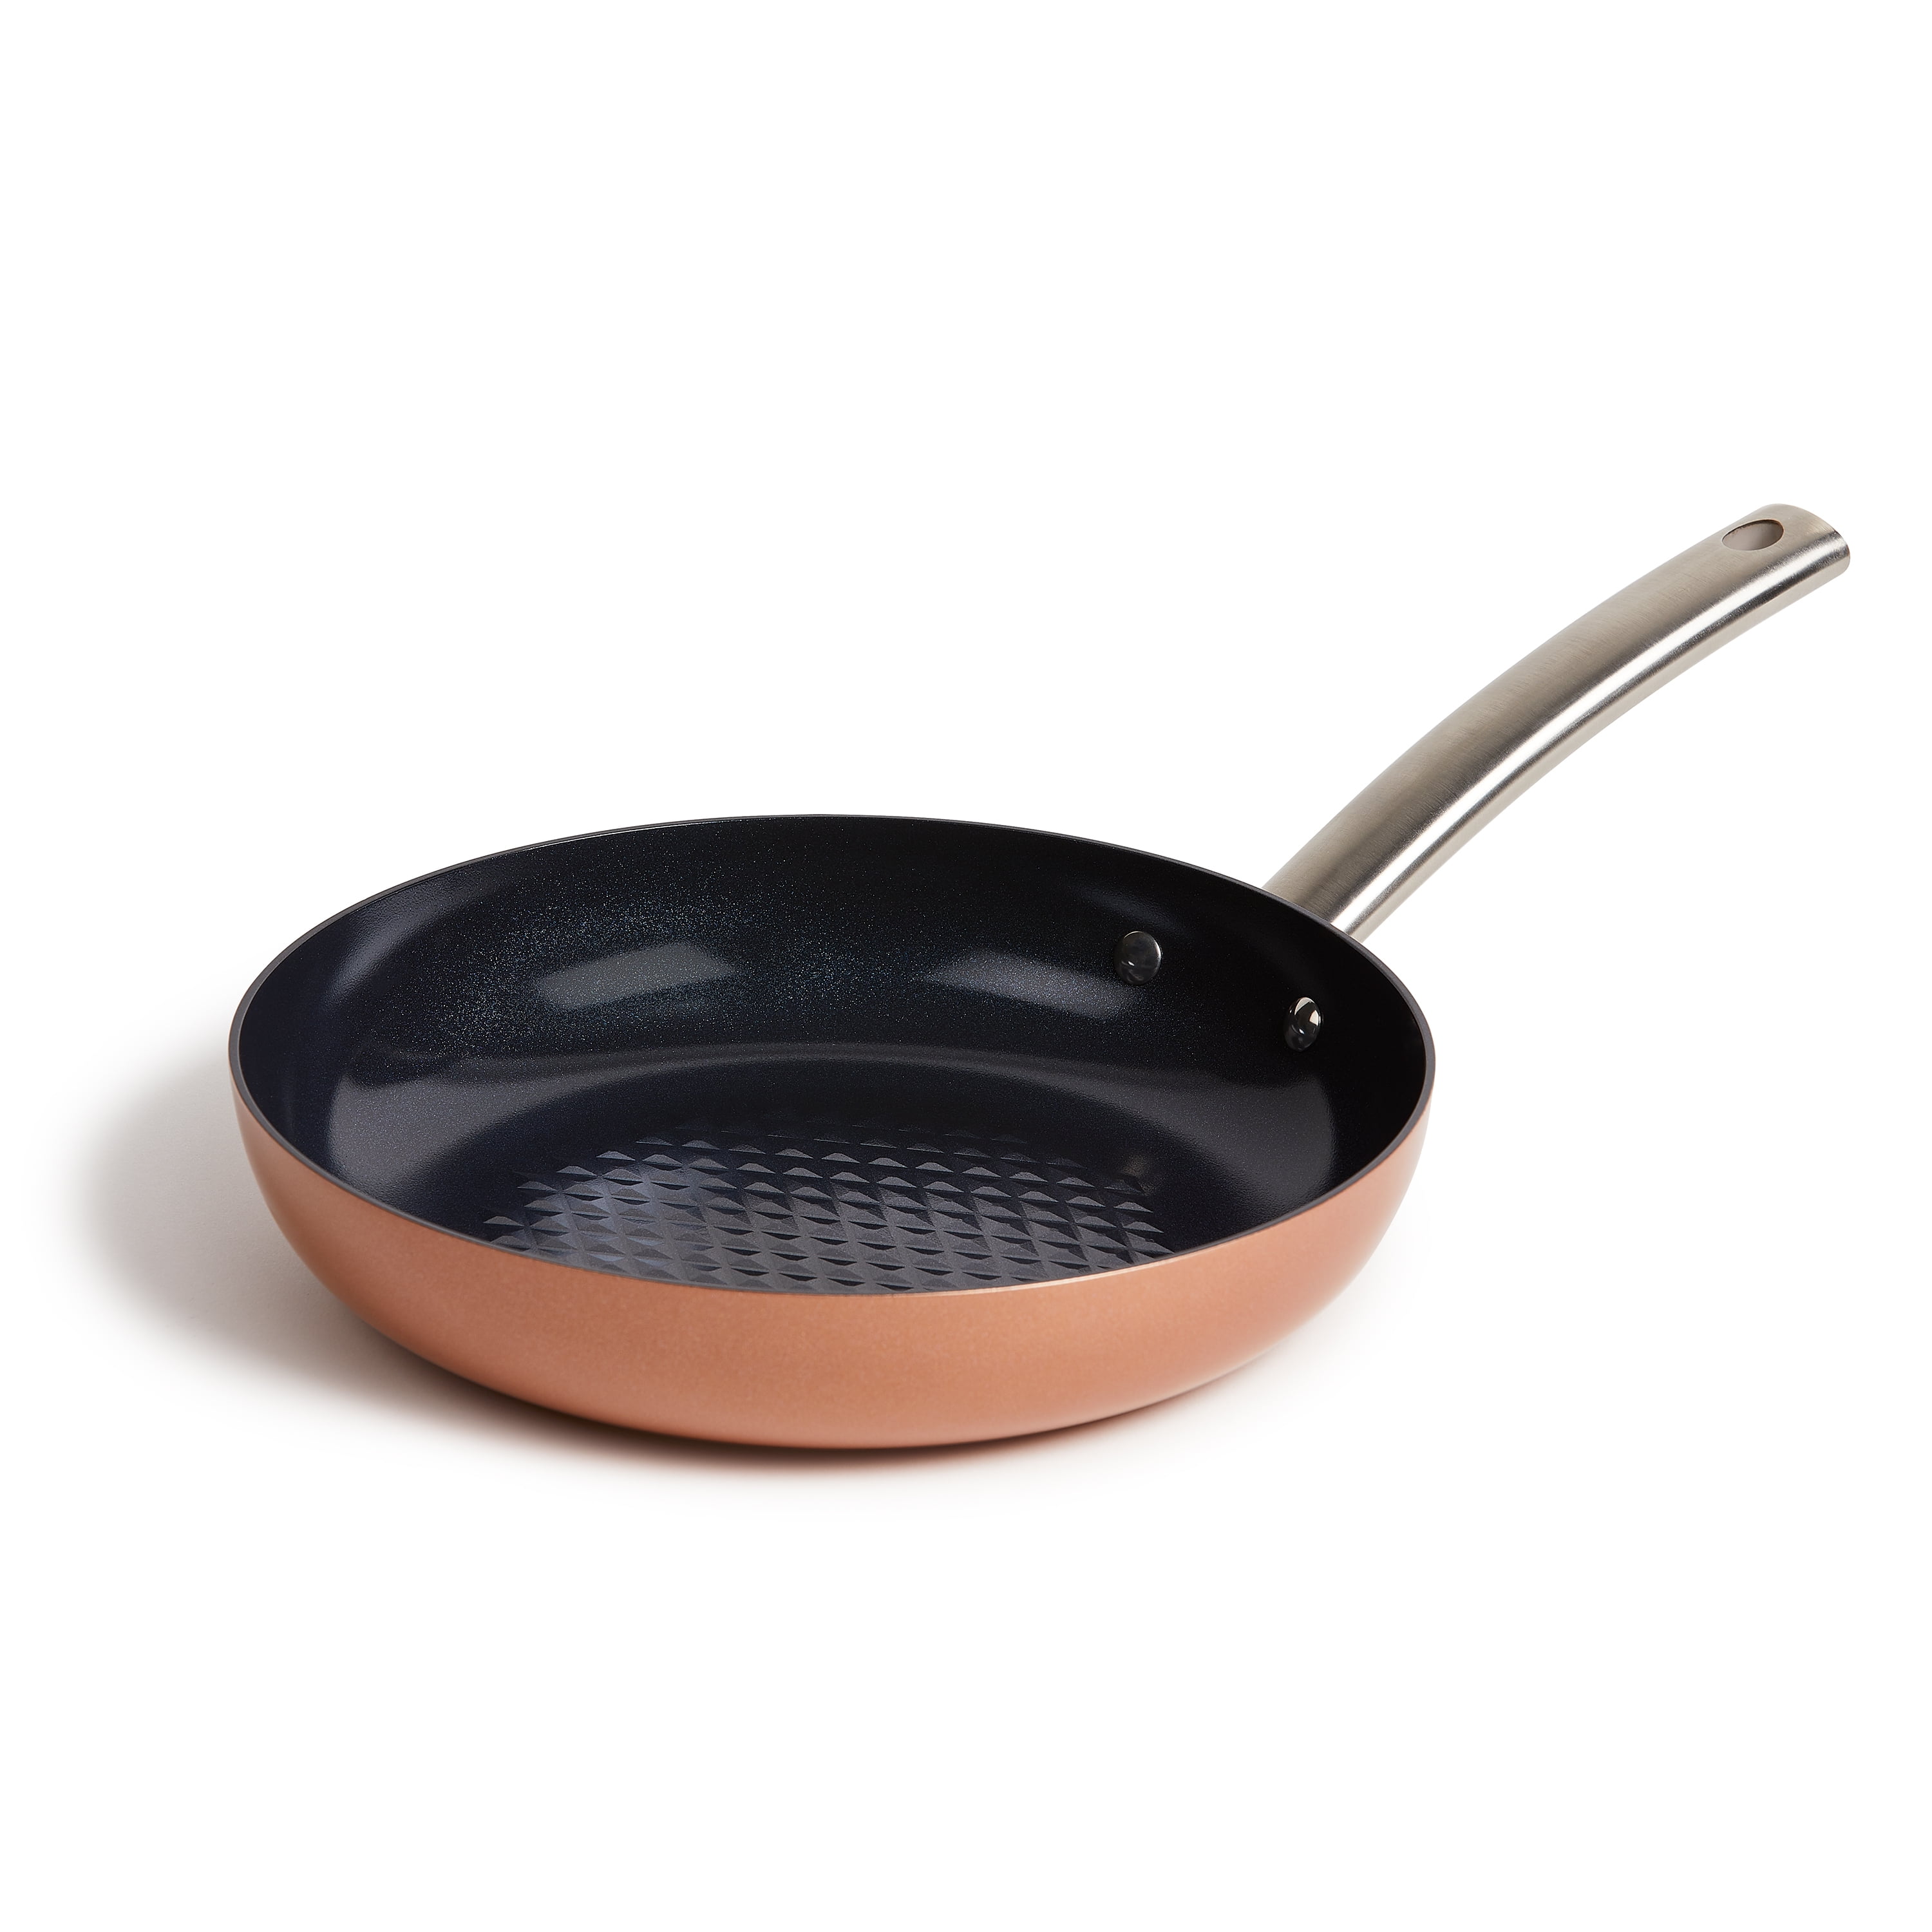 Culinary Edge 3D Diamond Textured Bottom 11-Inch Nonstick Oven/Dishwasher Safe Fry Pan Rose Gold